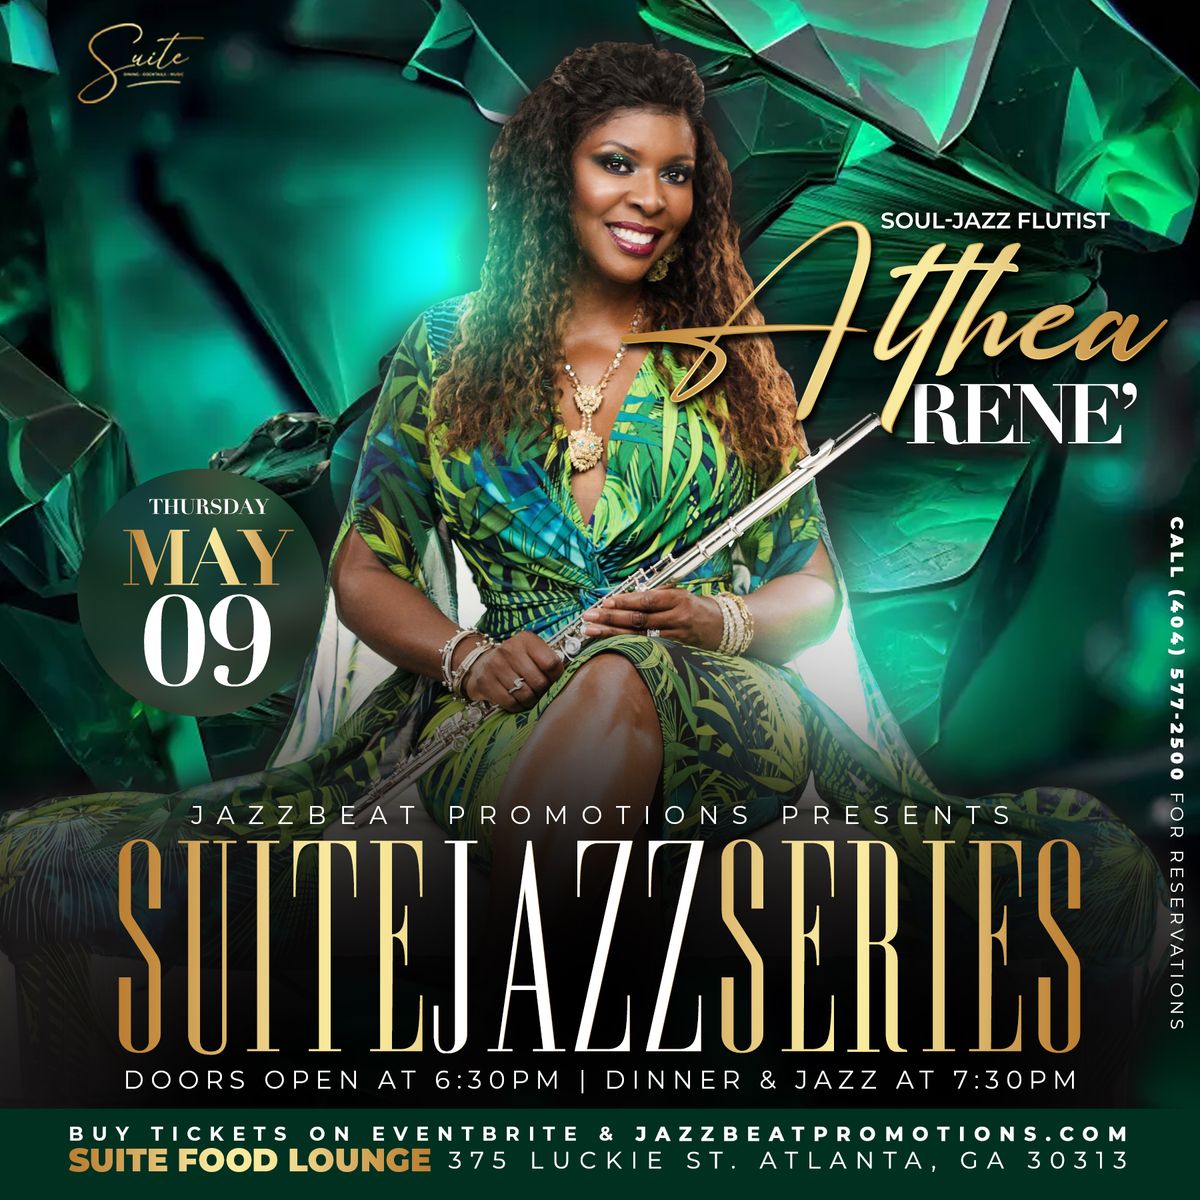 Althea Rene Live at Suite